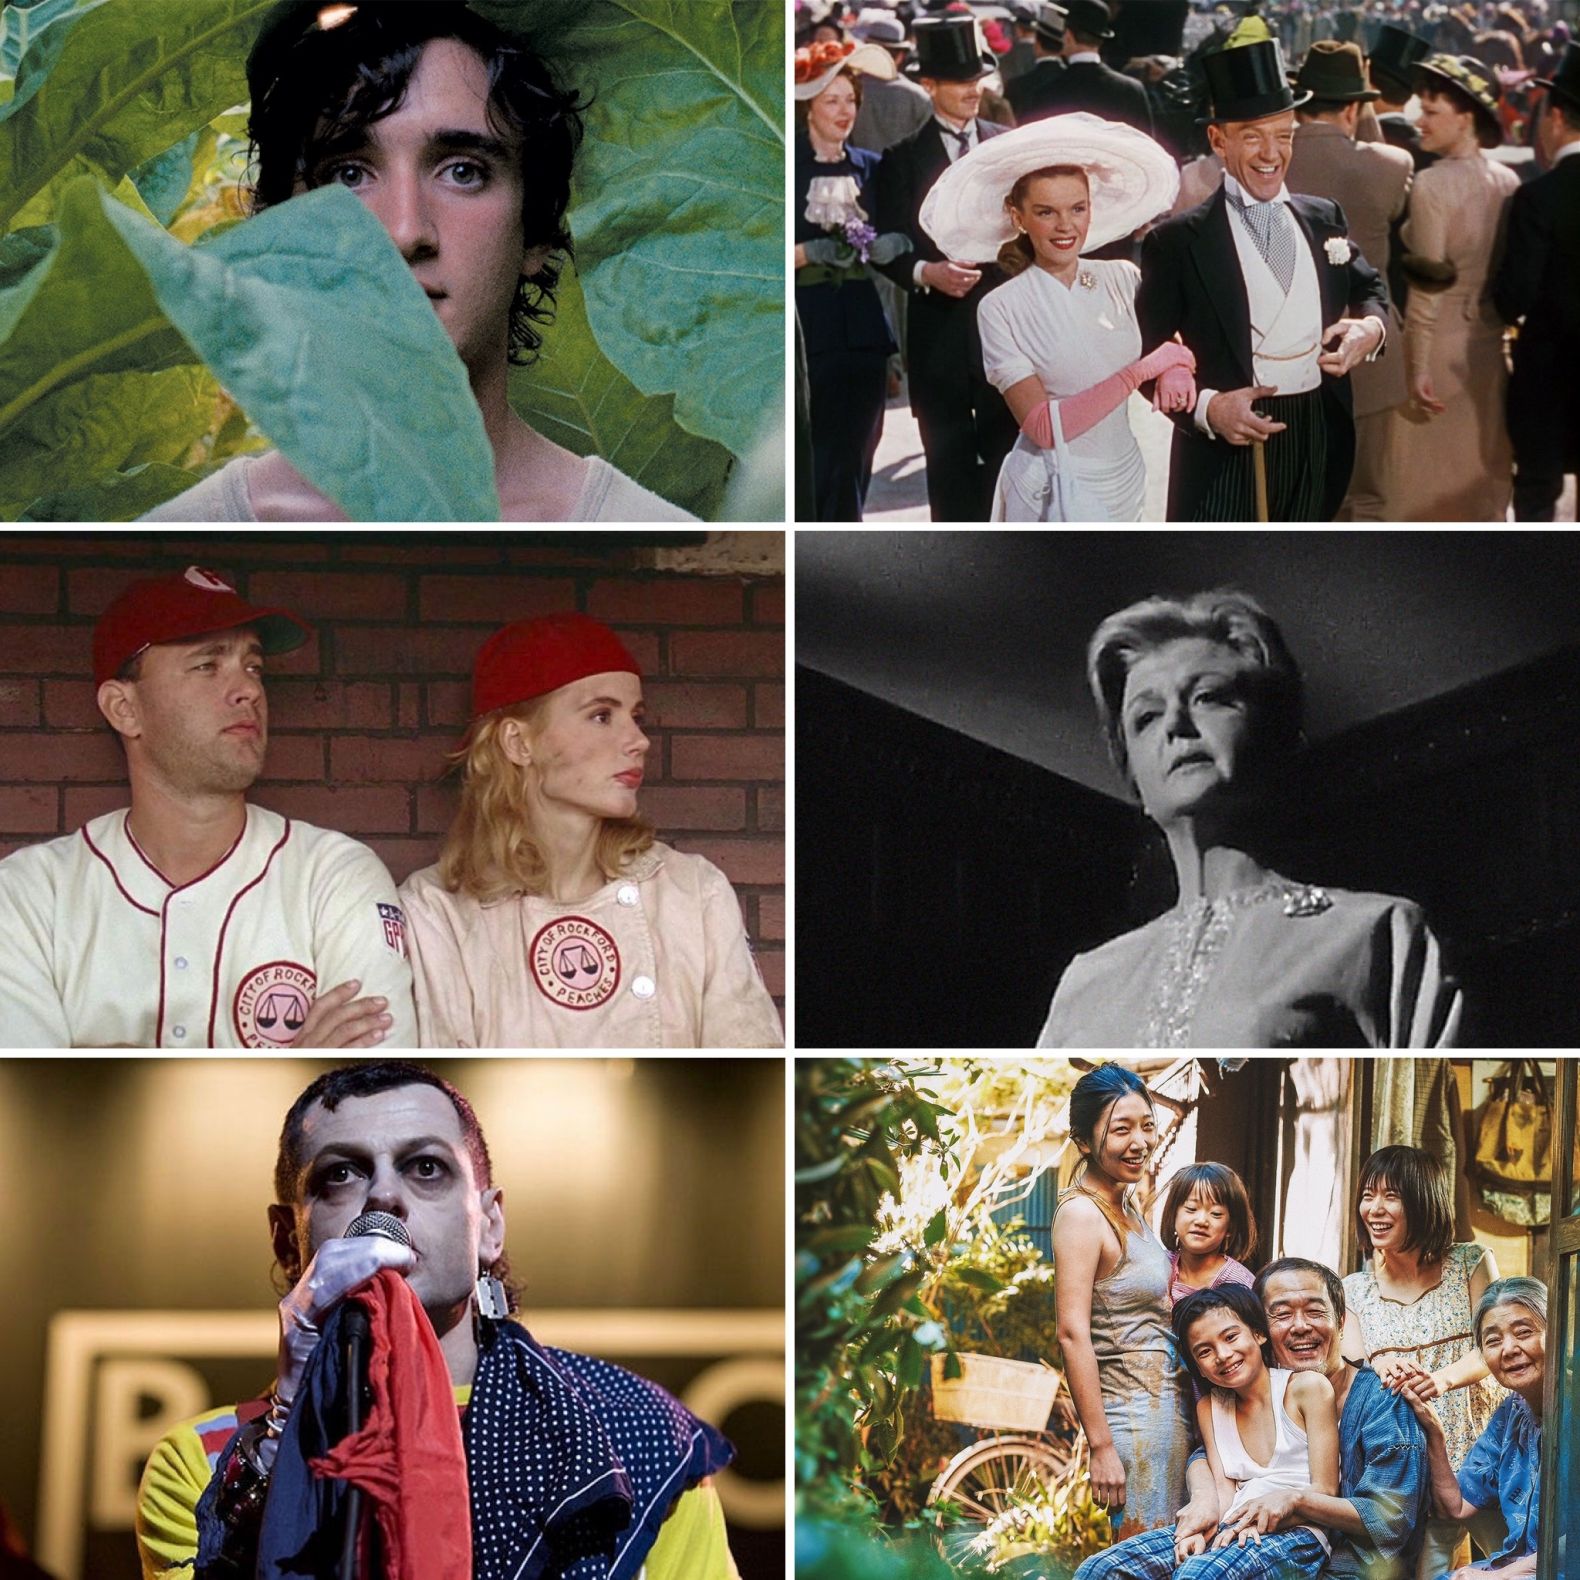 Duke Box #35: Our Guide to the Best Films on TV